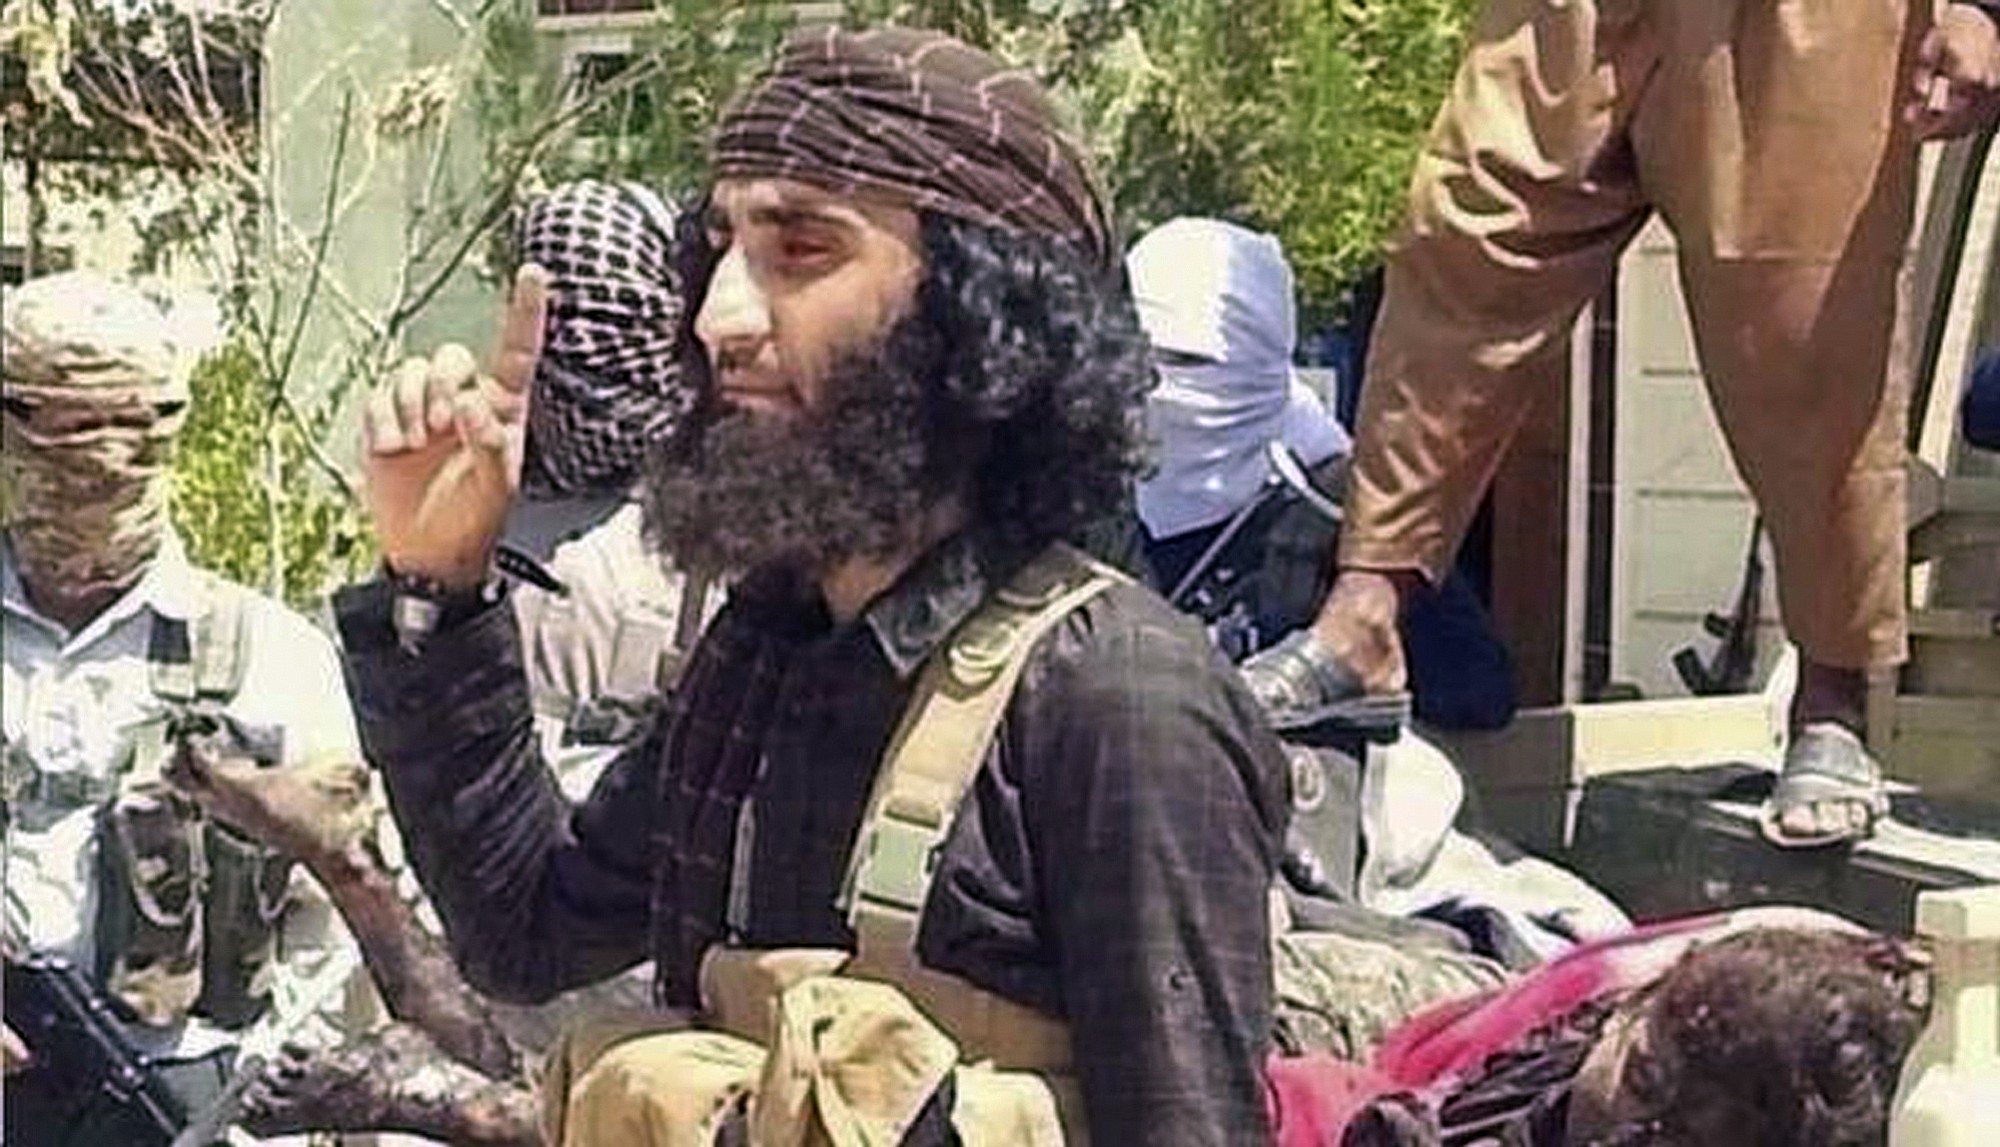 This undated image posted on a militant website shows Abu Khattab al-Kurdi, or Abu Khattab the Kurd, one of the Islamic State group's top military commanders in the offensive on the Syrian city of Kobani.